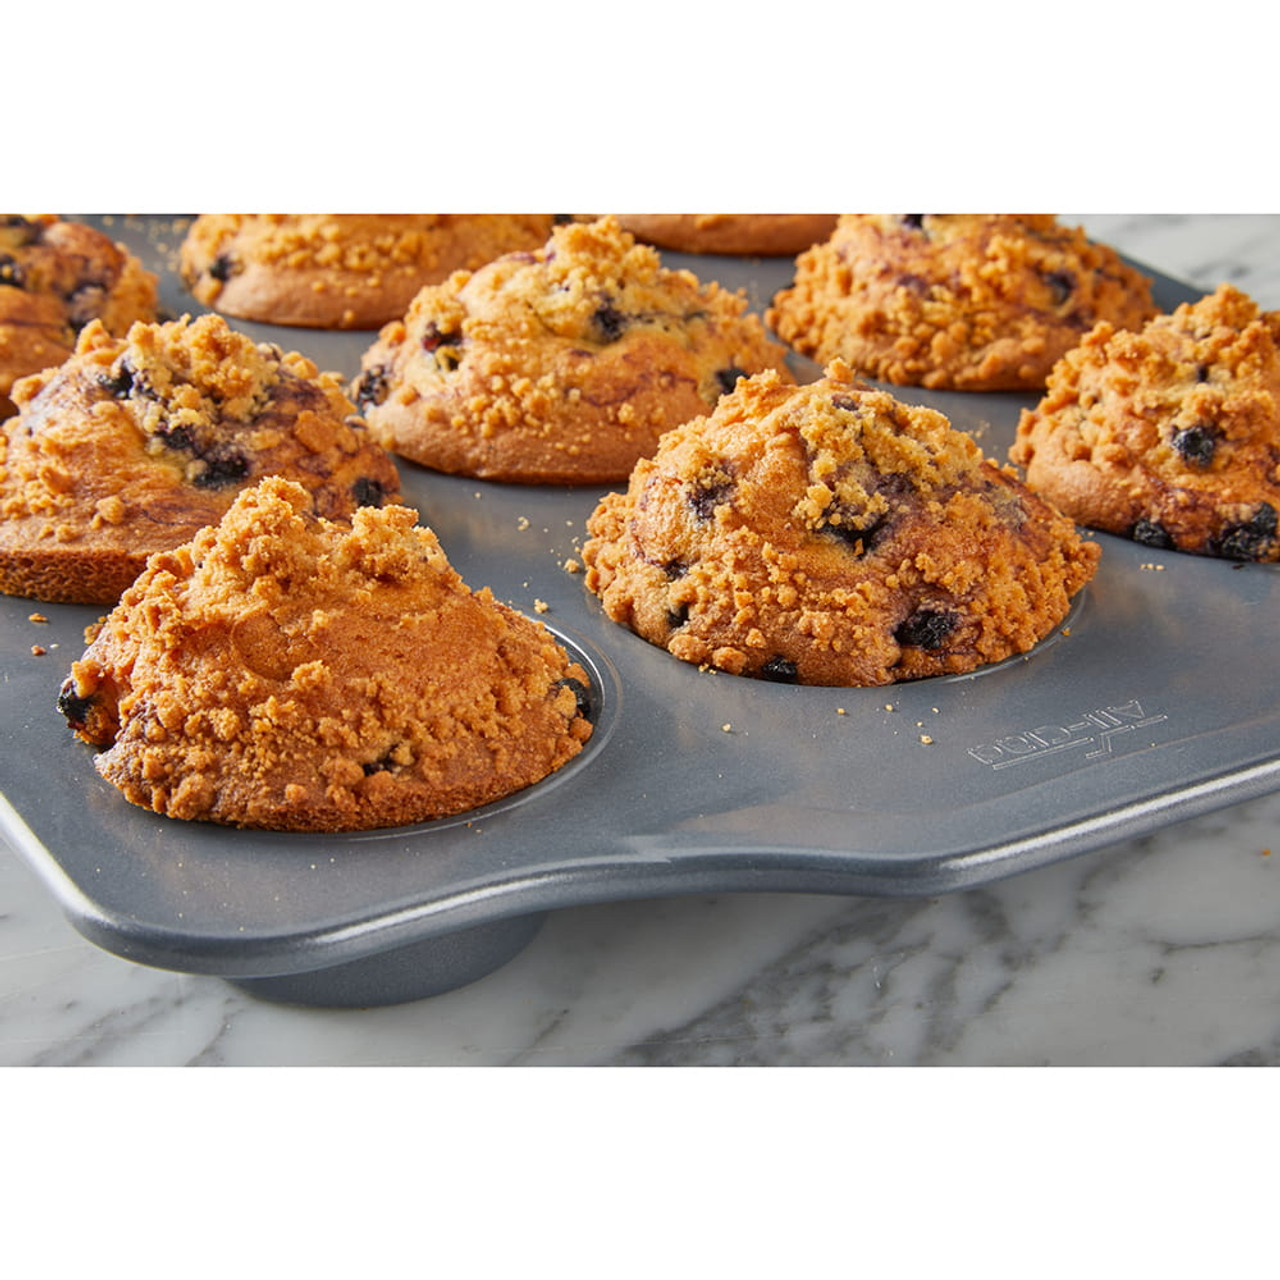 https://cdn11.bigcommerce.com/s-hccytny0od/images/stencil/1280x1280/products/3282/11745/all-clad-pro-release-muffin-pan-2__01552.1589500931.jpg?c=2?imbypass=on